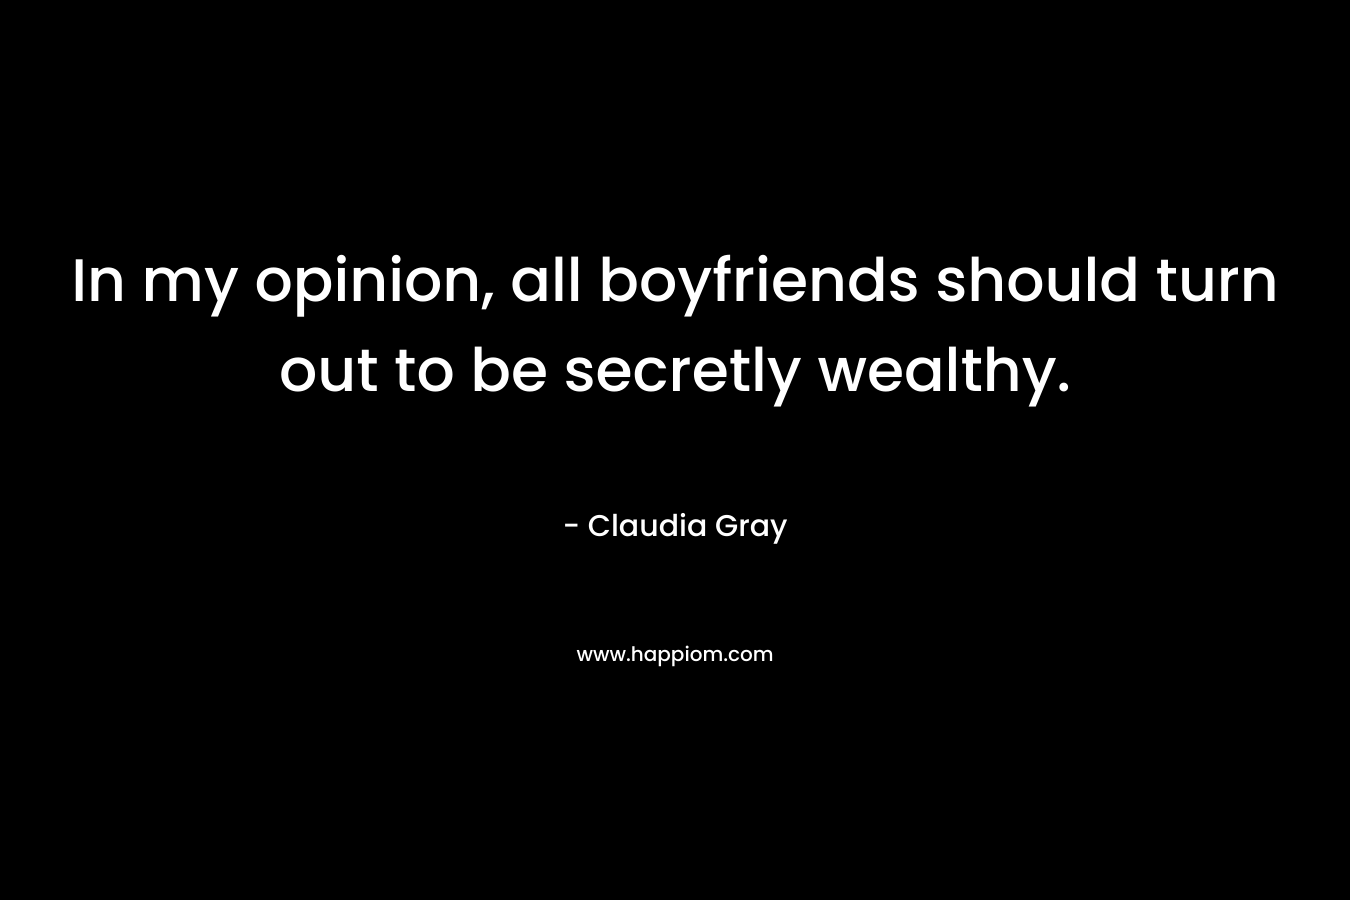 In my opinion, all boyfriends should turn out to be secretly wealthy.